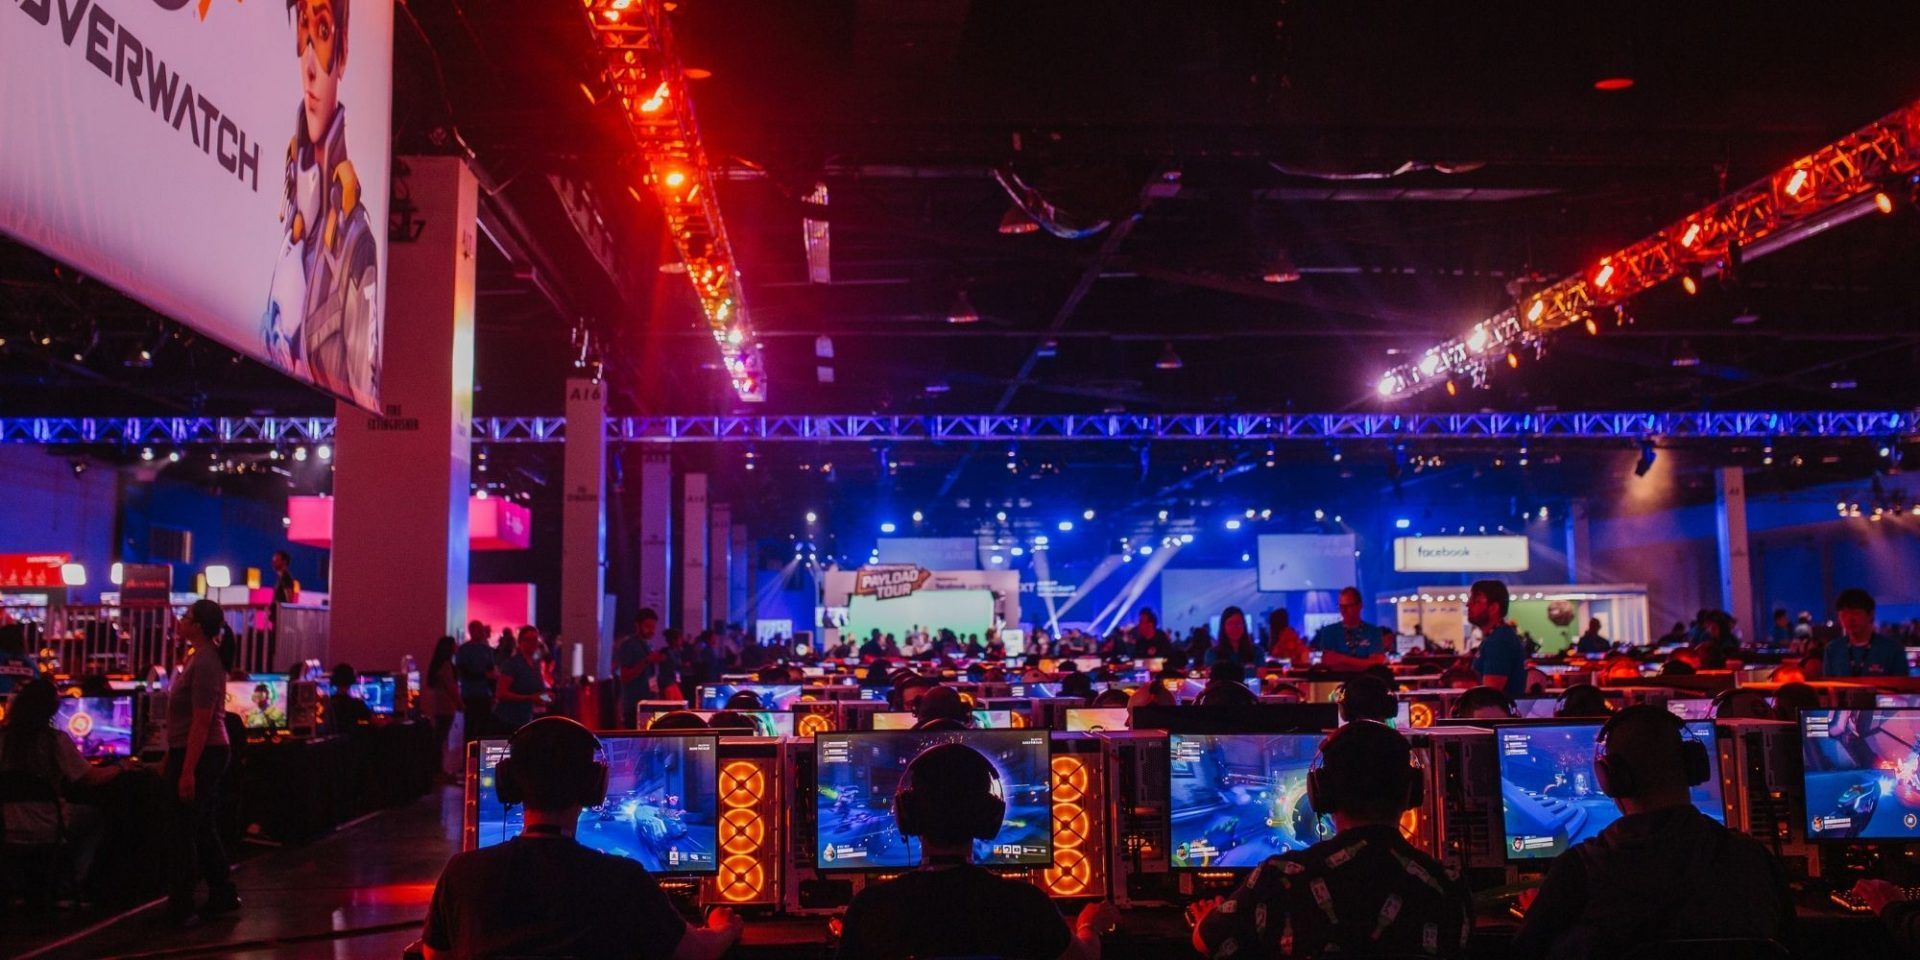 A screenshot of an Overwatch event at Blizzcon 2019.